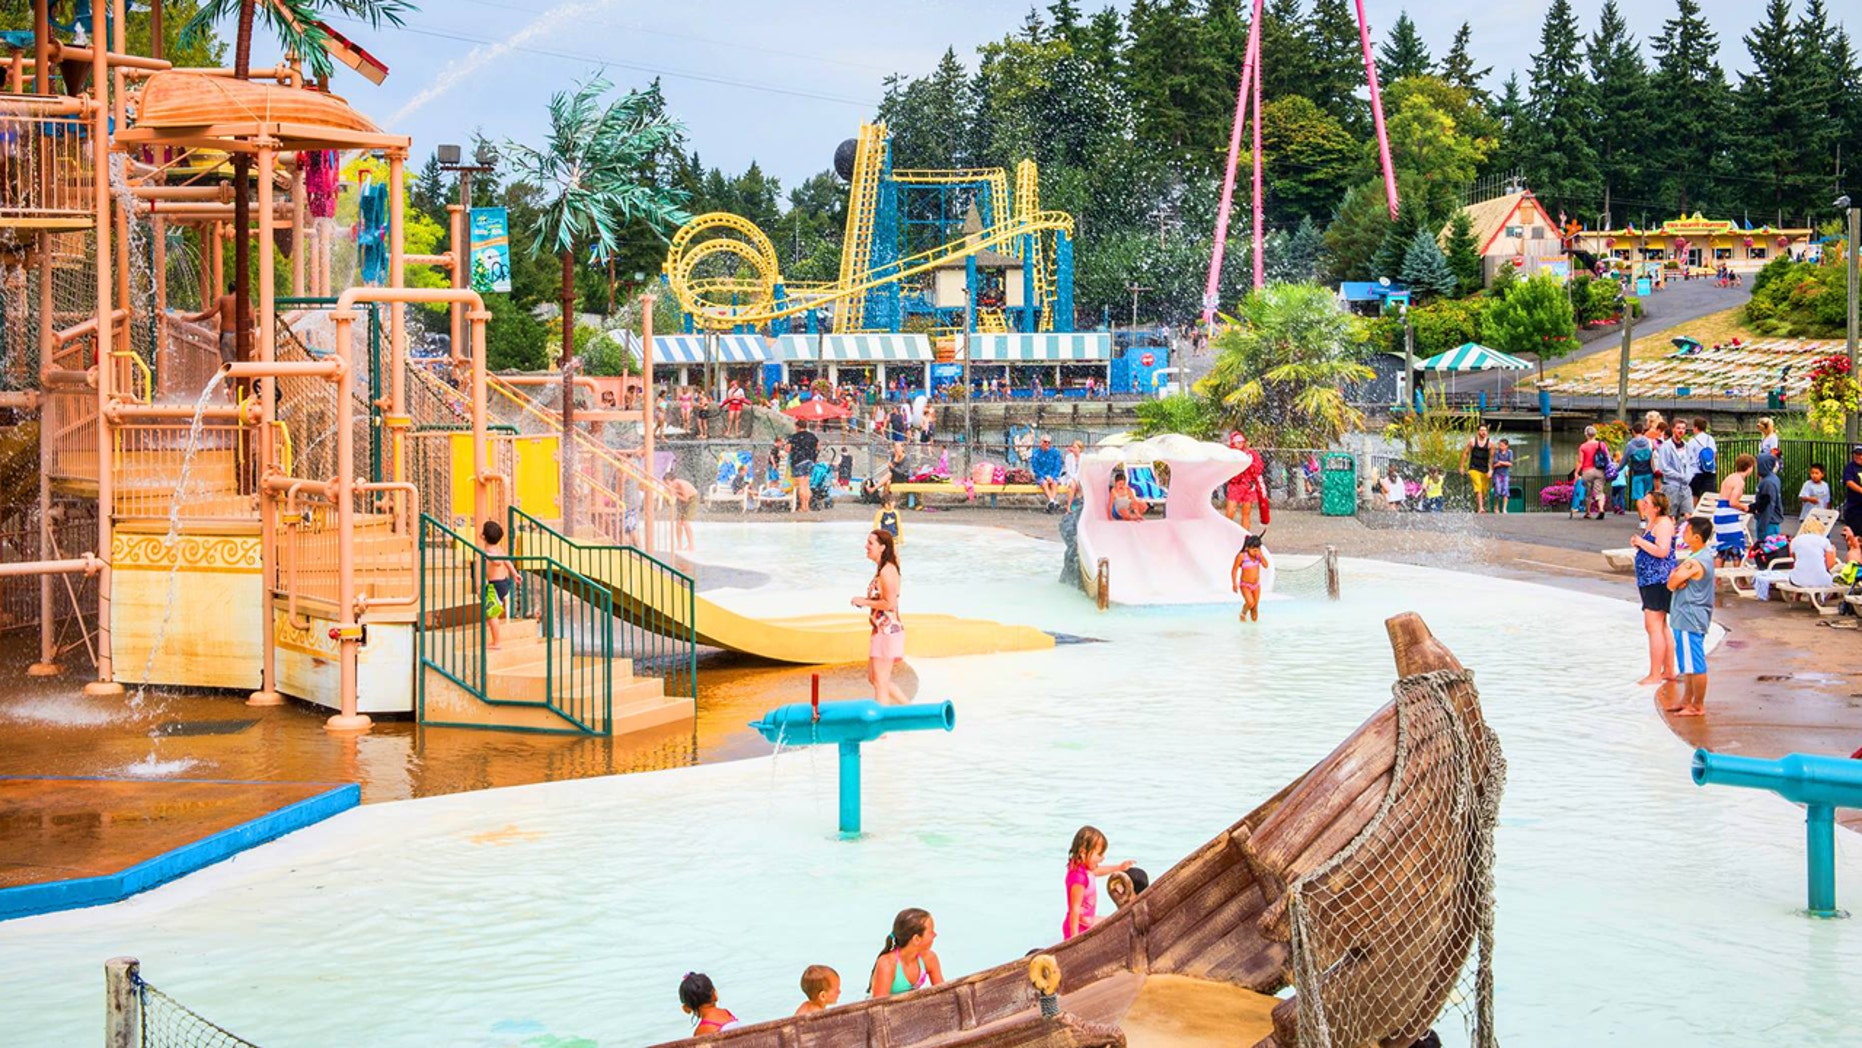 Man dies in apparent drowning at Wild Waves water park | Fox News